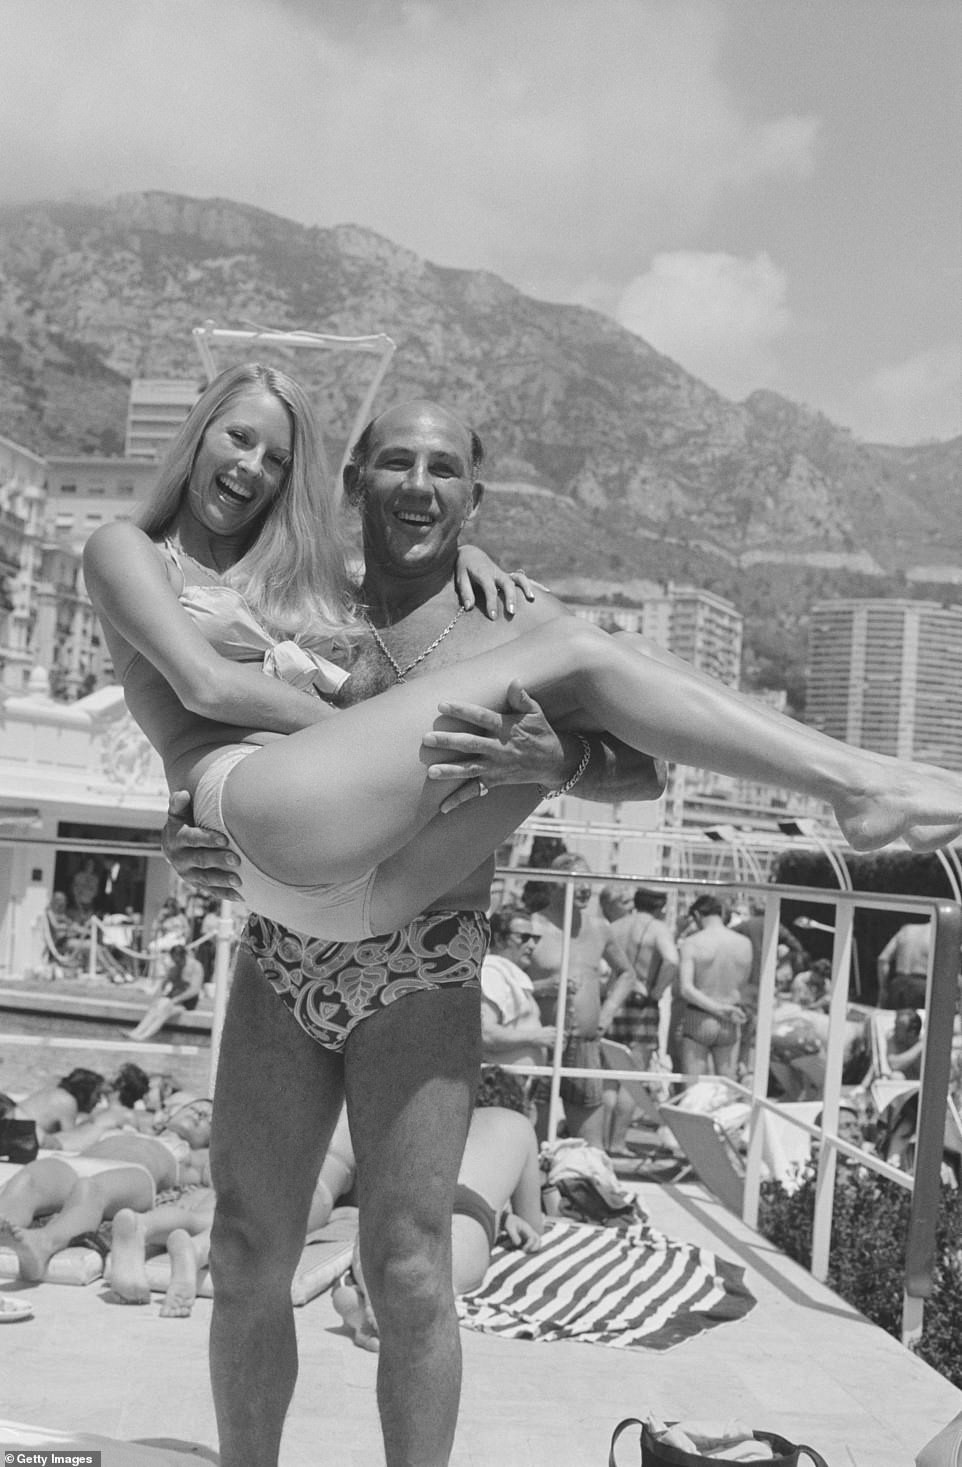 The former driver lifts up fashion model Liz Hooley while on holiday in Monaco back in June 1973.